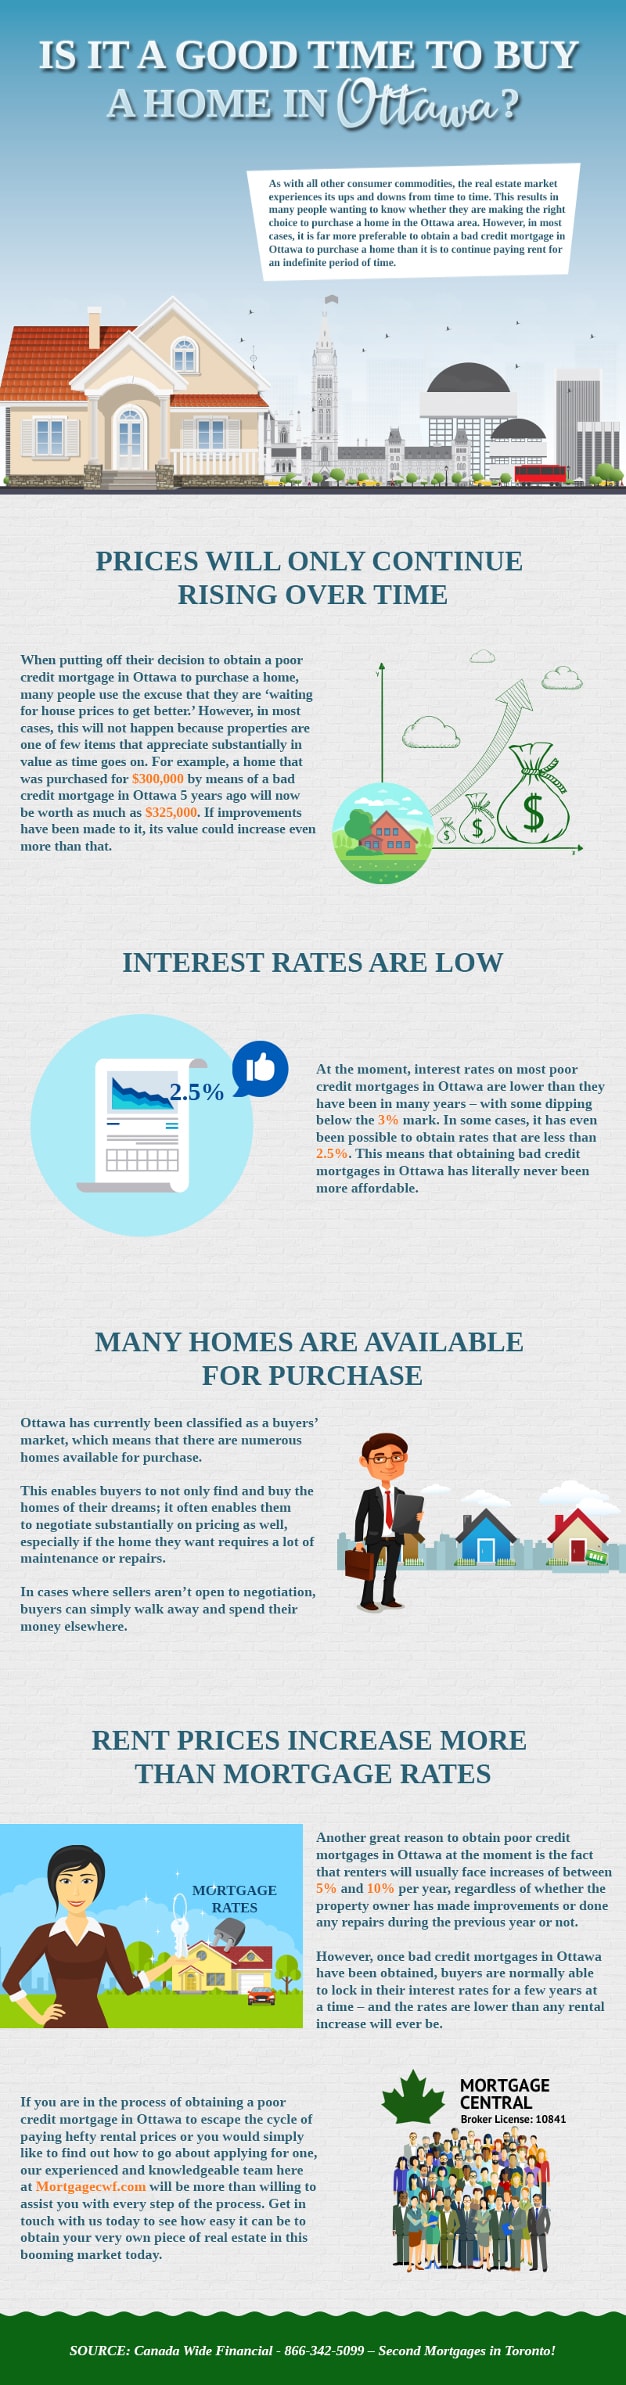 Is it a Good Time to Buy a Home in Ottawa - Infographic